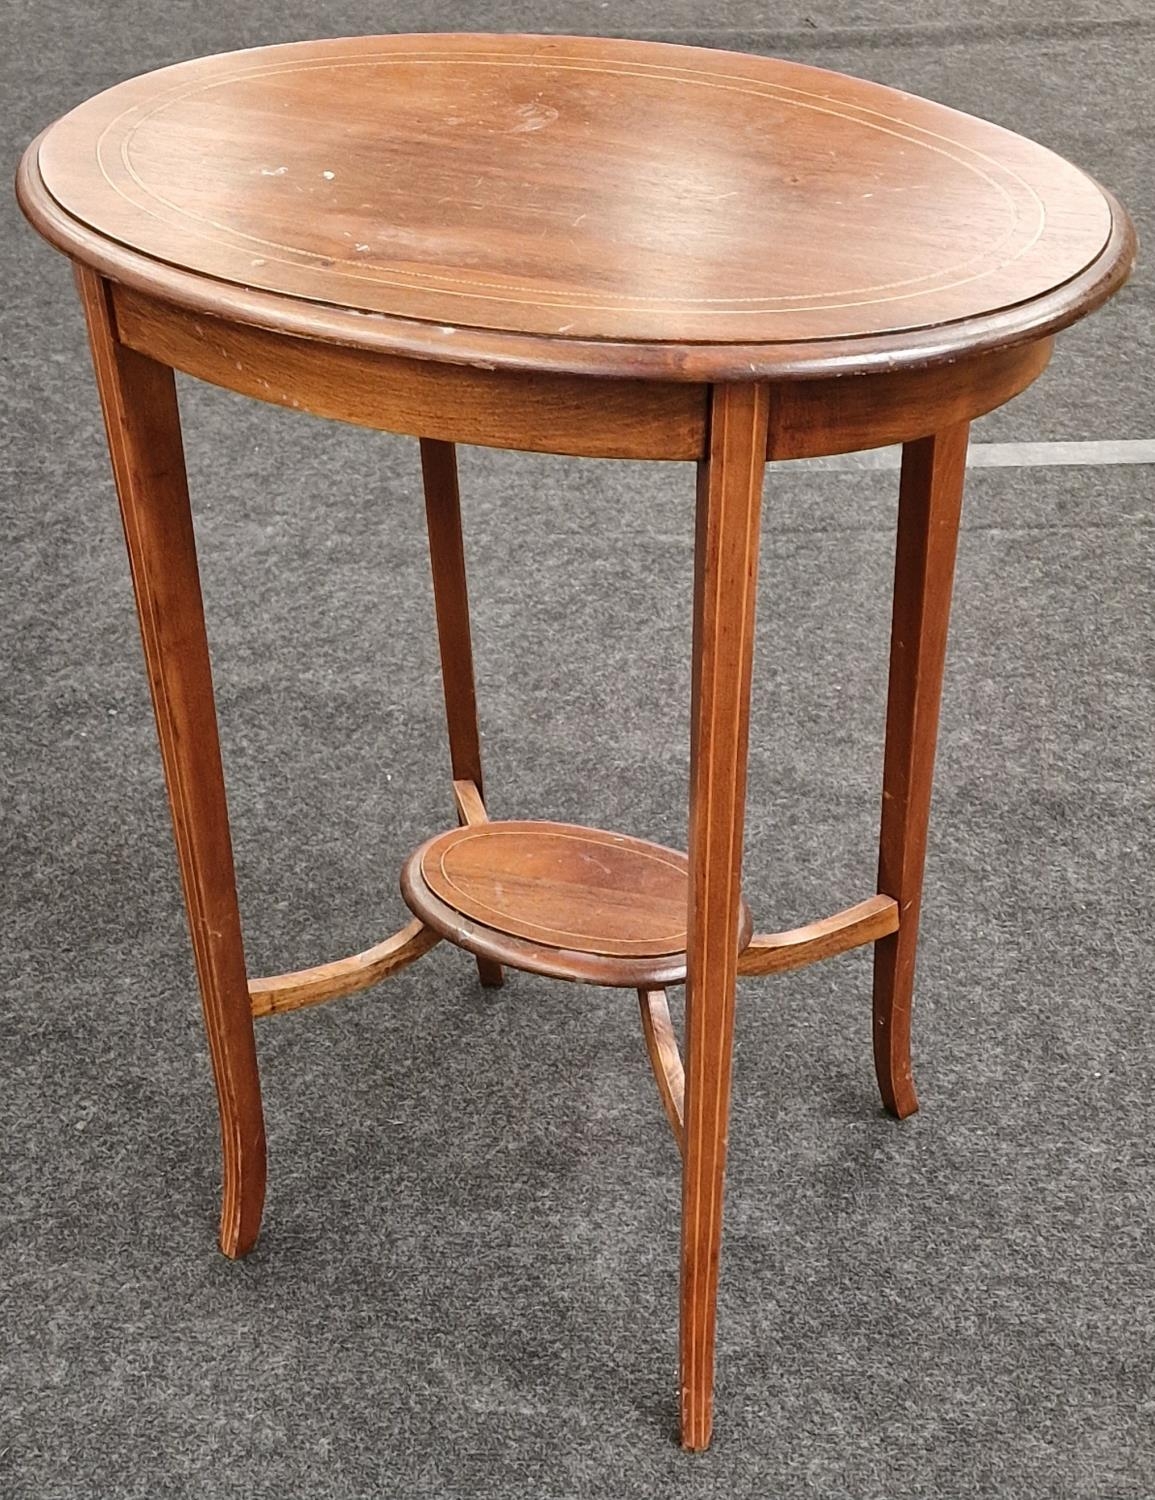 Edwardian mahogany oval inlaid lamp table with slade legs and fitted under tier 70x60x40cm